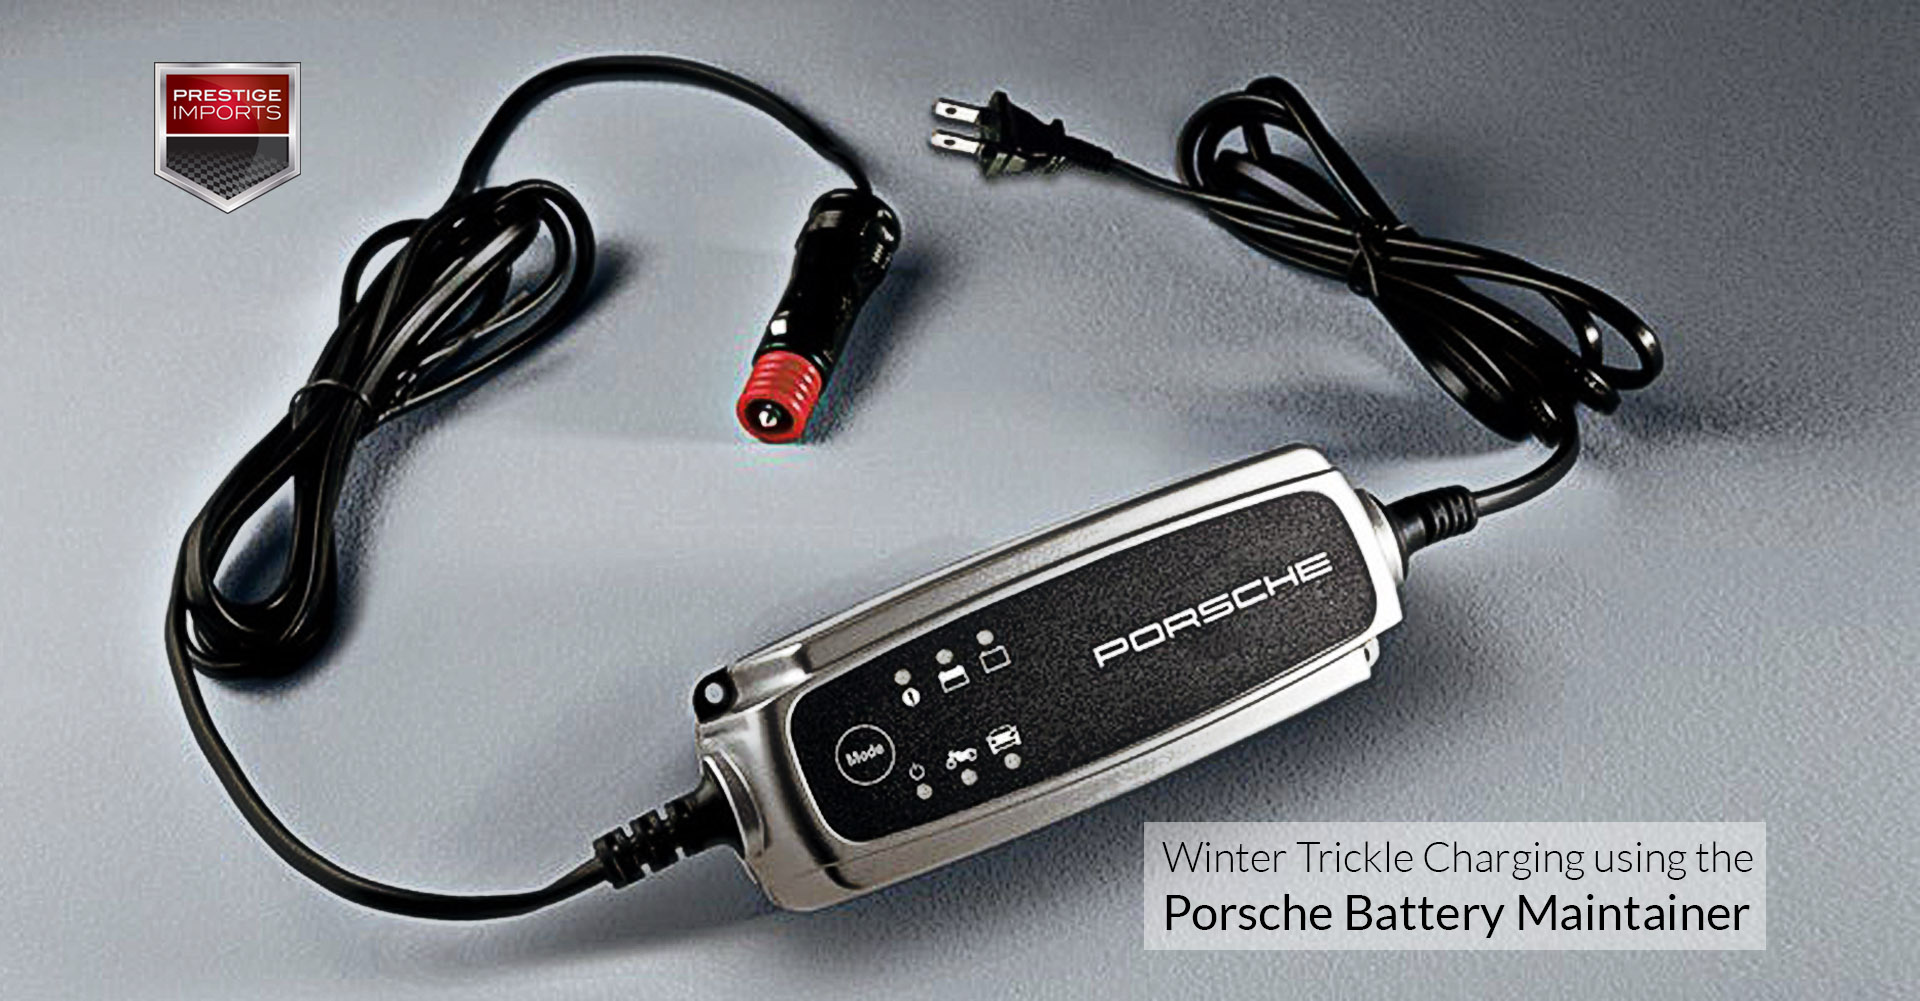 Winter Trickle Charging using the Porsche Battery Maintainer